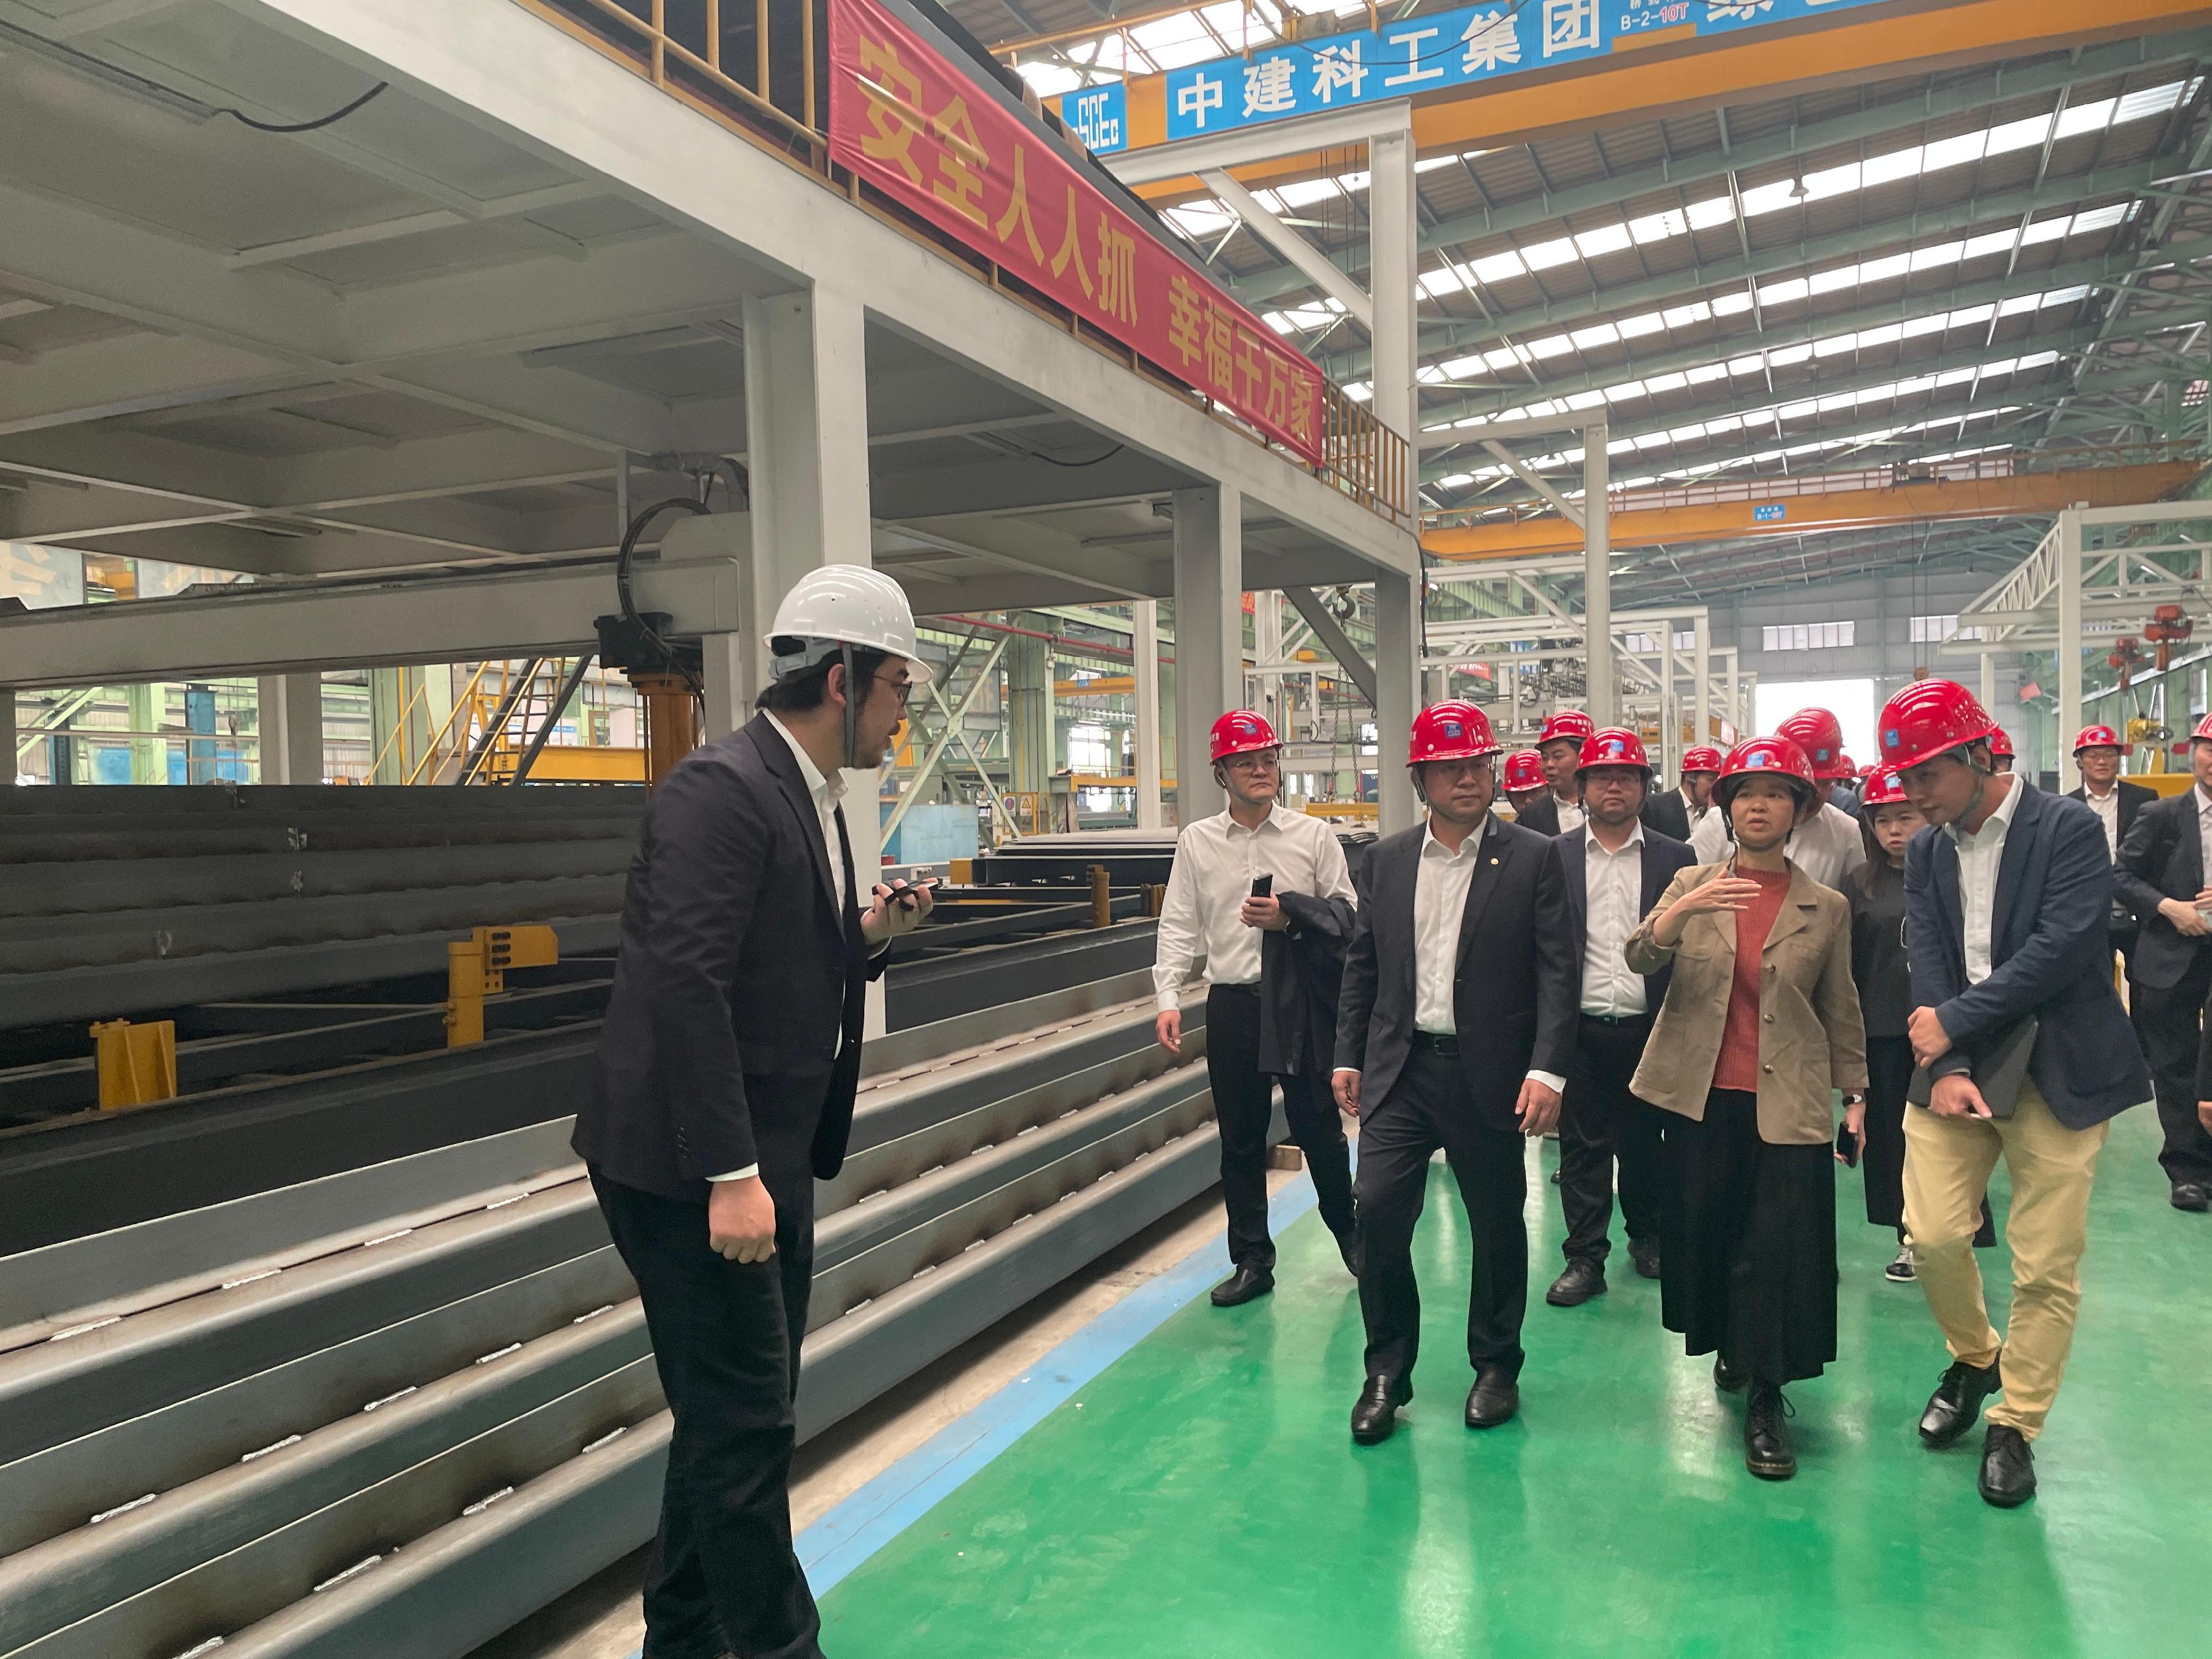 The Secretary for Housing, Ms Winnie Ho, and a delegation of representatives from the Housing Bureau and the Architectural Services Department visited Huizhou today (March 25) to inspect the production progress of Modular Integrated Construction (MiC) modules of Light Public Housing (LPH). Photo shows Ms Ho (front row, second right) visiting CSCEC Science and Industry Greentech Corporation Limited to inspect the factory manufacturing LPH MiC modules.